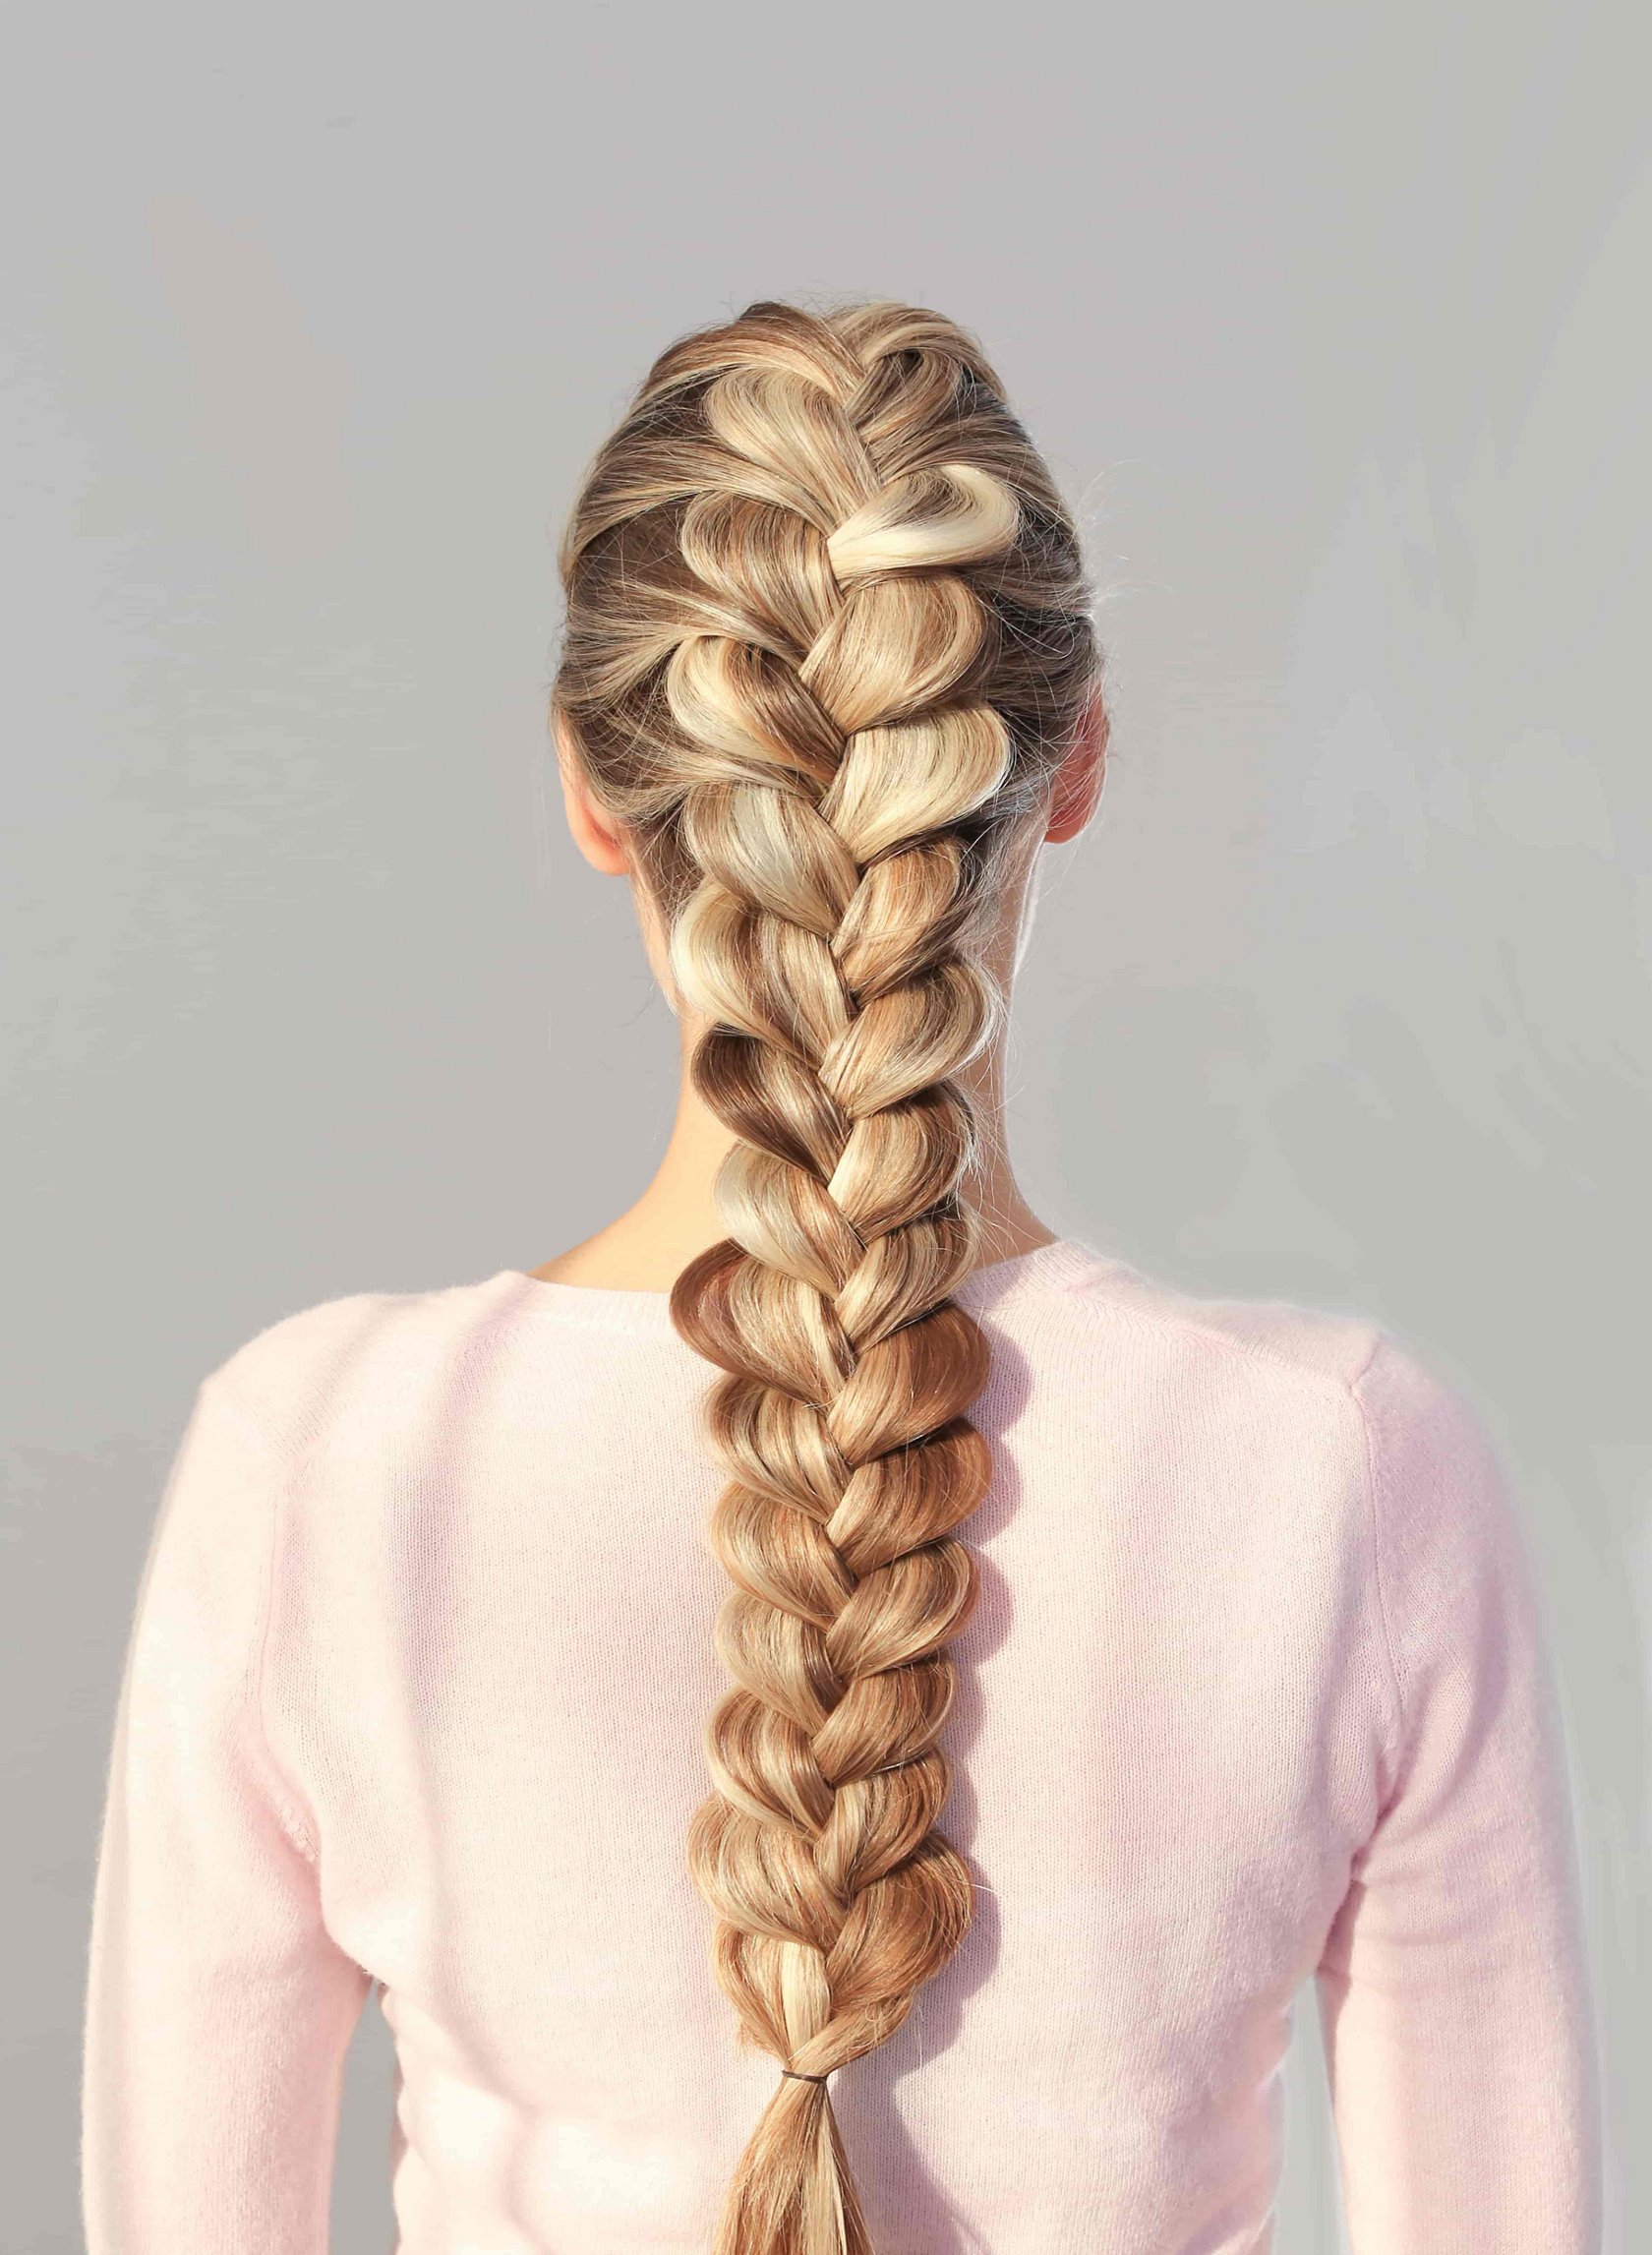 Braids Hairstyles & Fashion Trends For Ladies